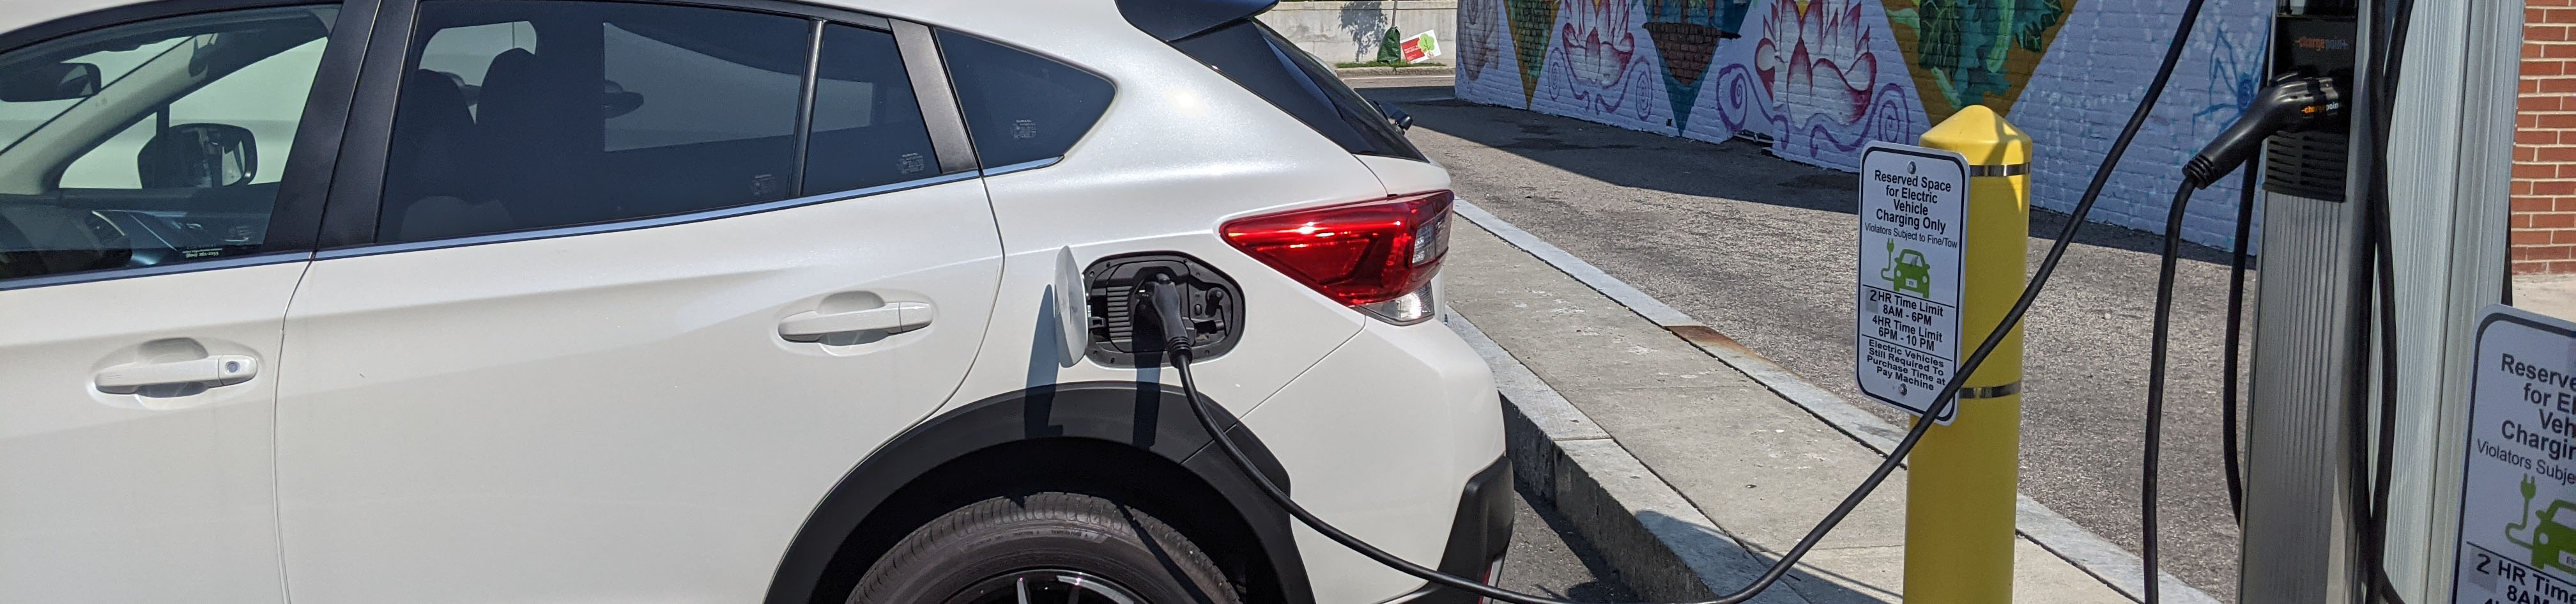 A white hatchback plugged into an EV charger in an outdoor parking lot